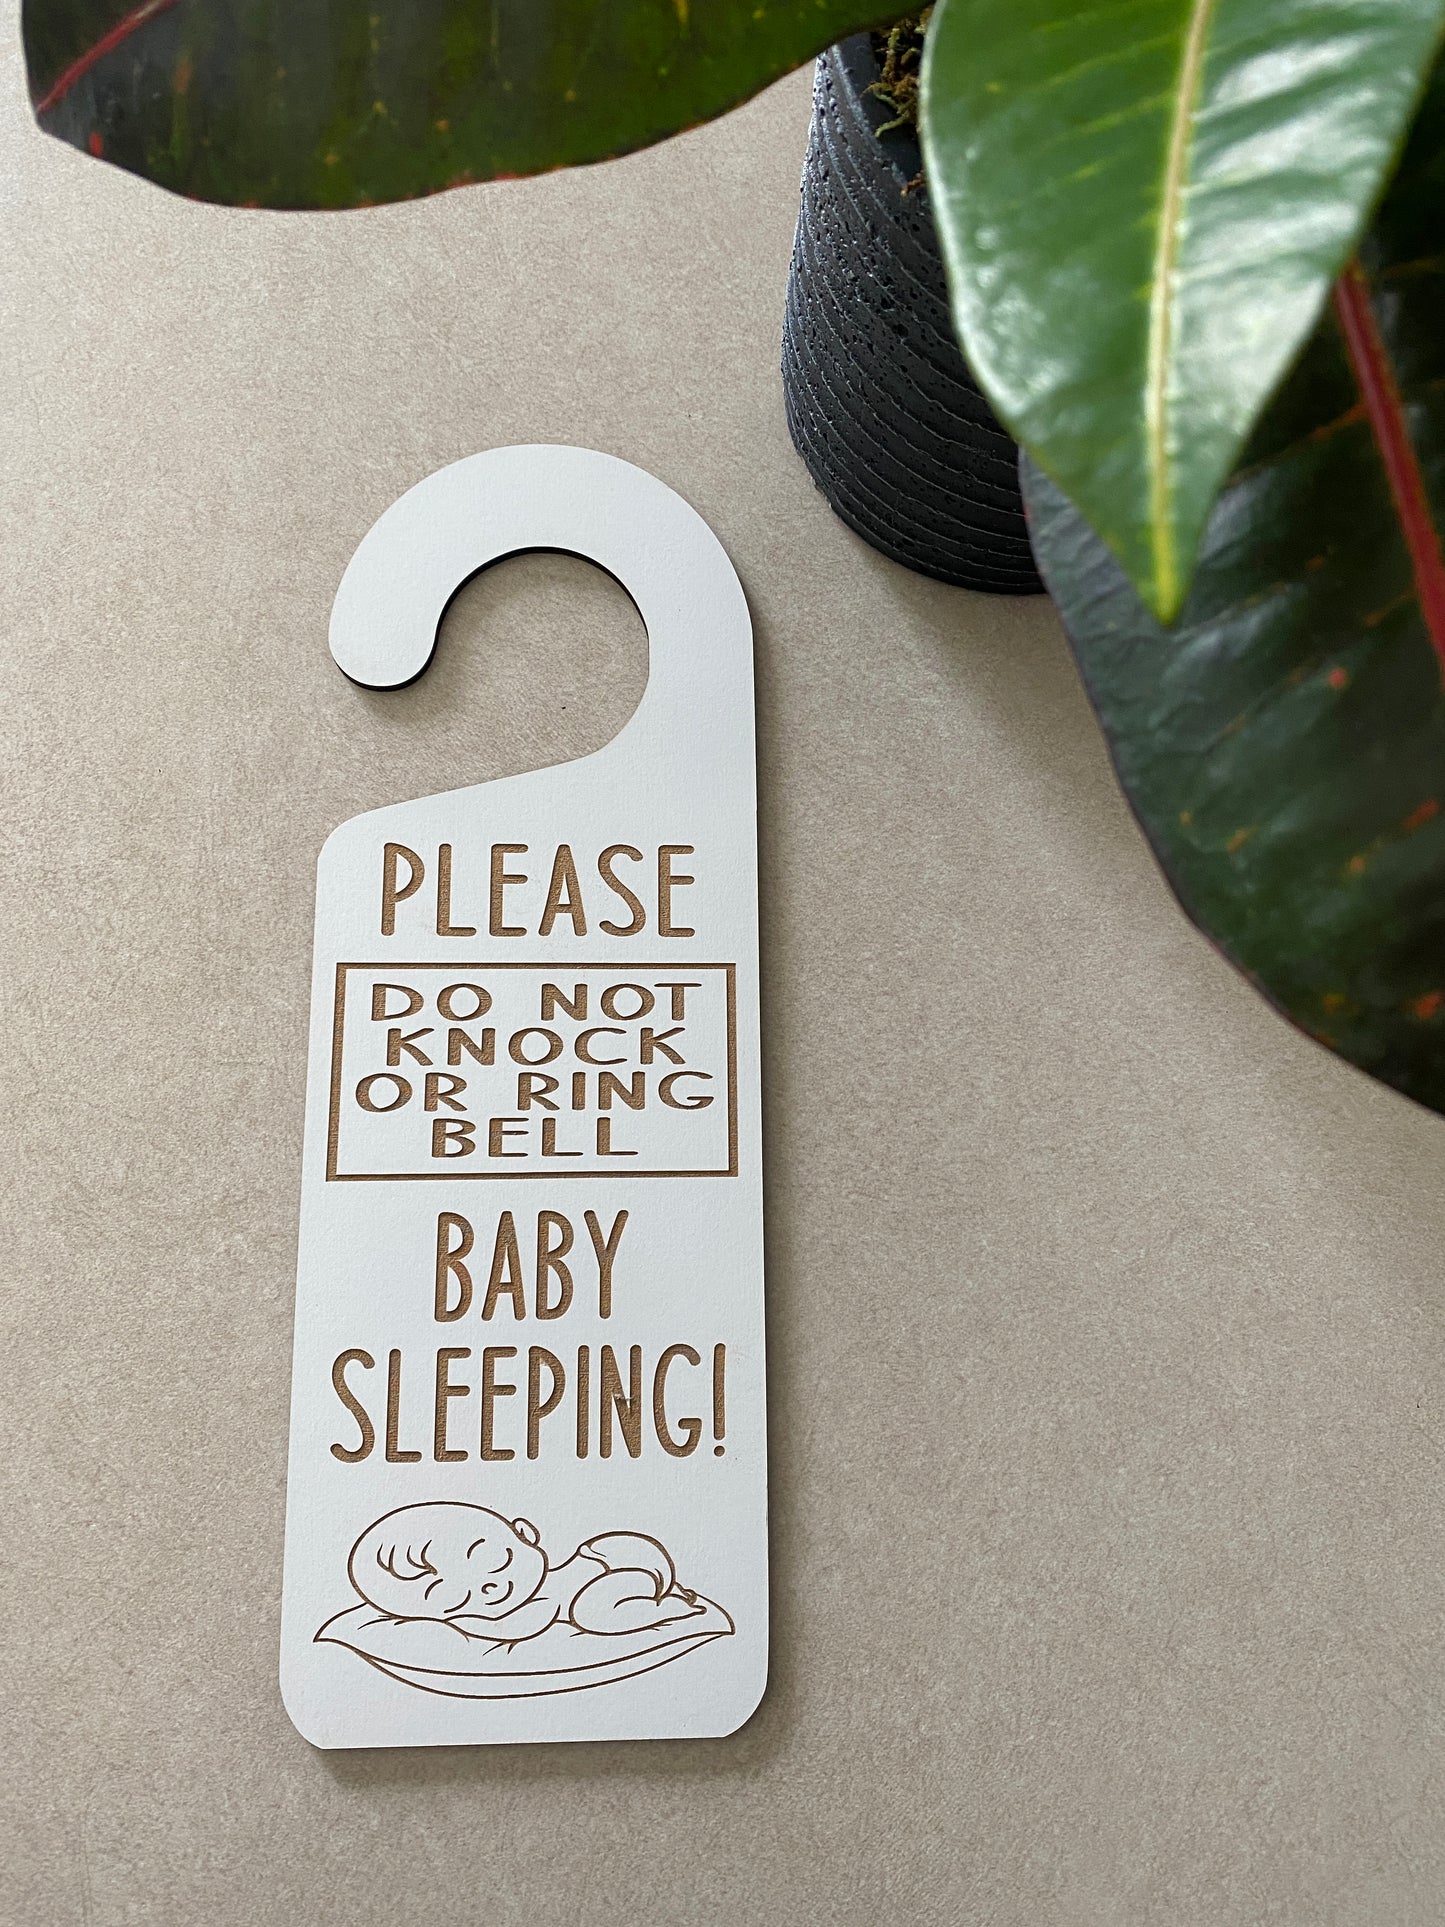 Please Do Not Knock Or Ring Bell Baby Sleeping doorknob sign